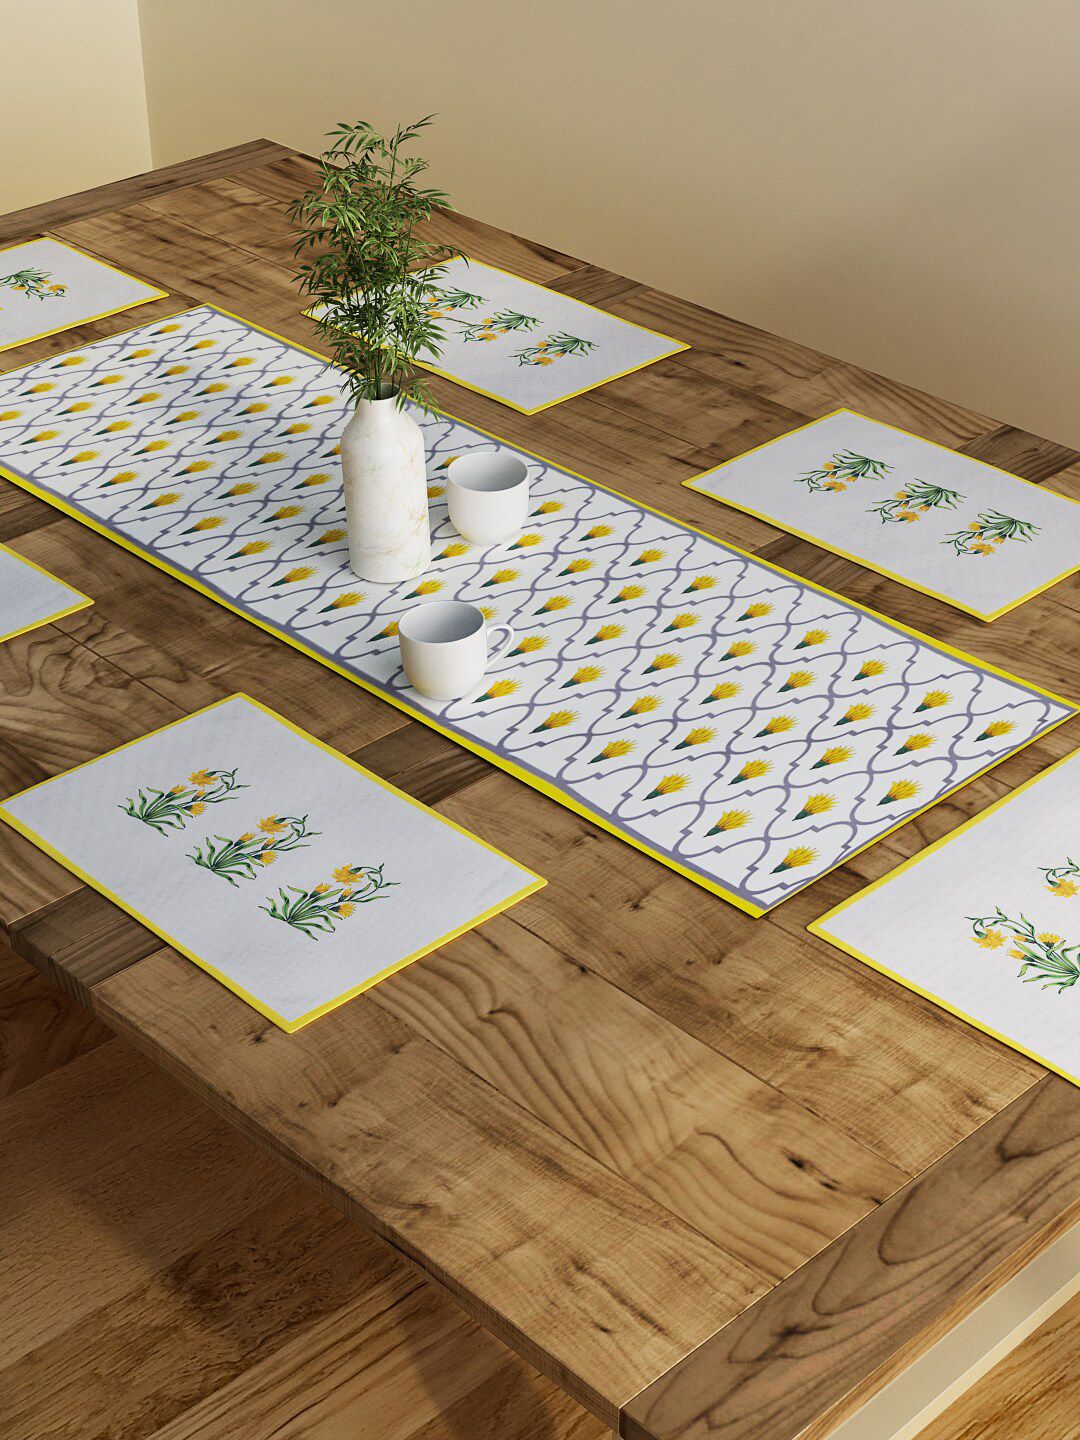 SEJ by Nisha Gupta Set of 6 Mustard Printed Cotton Table Placemats and Runner Price in India